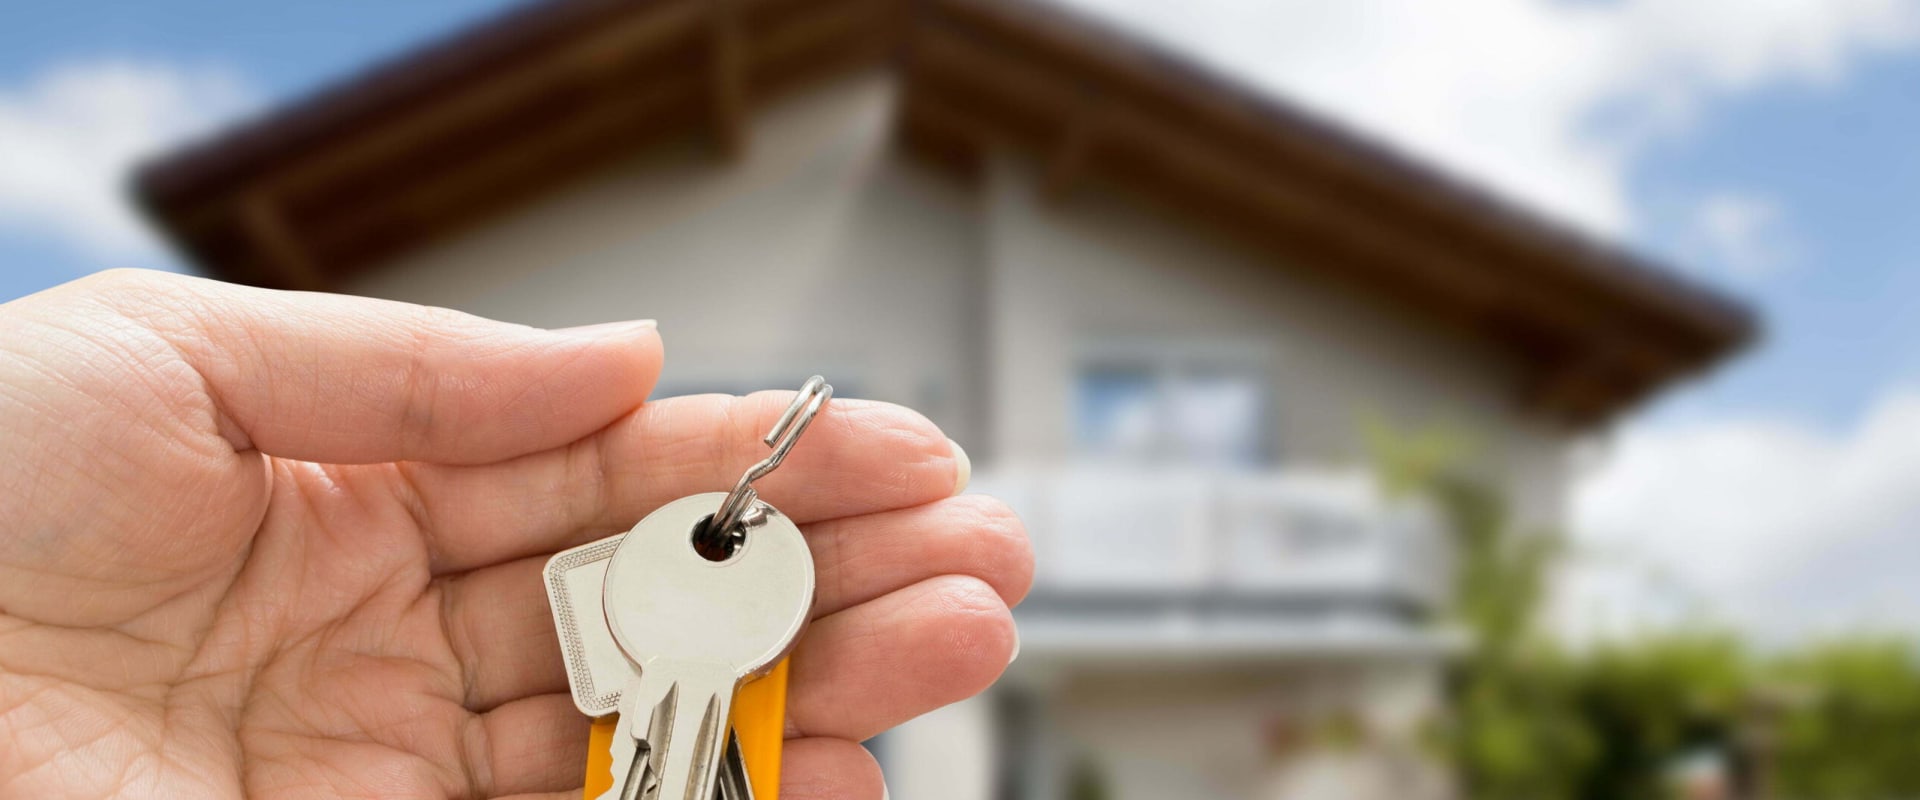 How to Get a New House Key Without the Original - Tips from a Locksmith